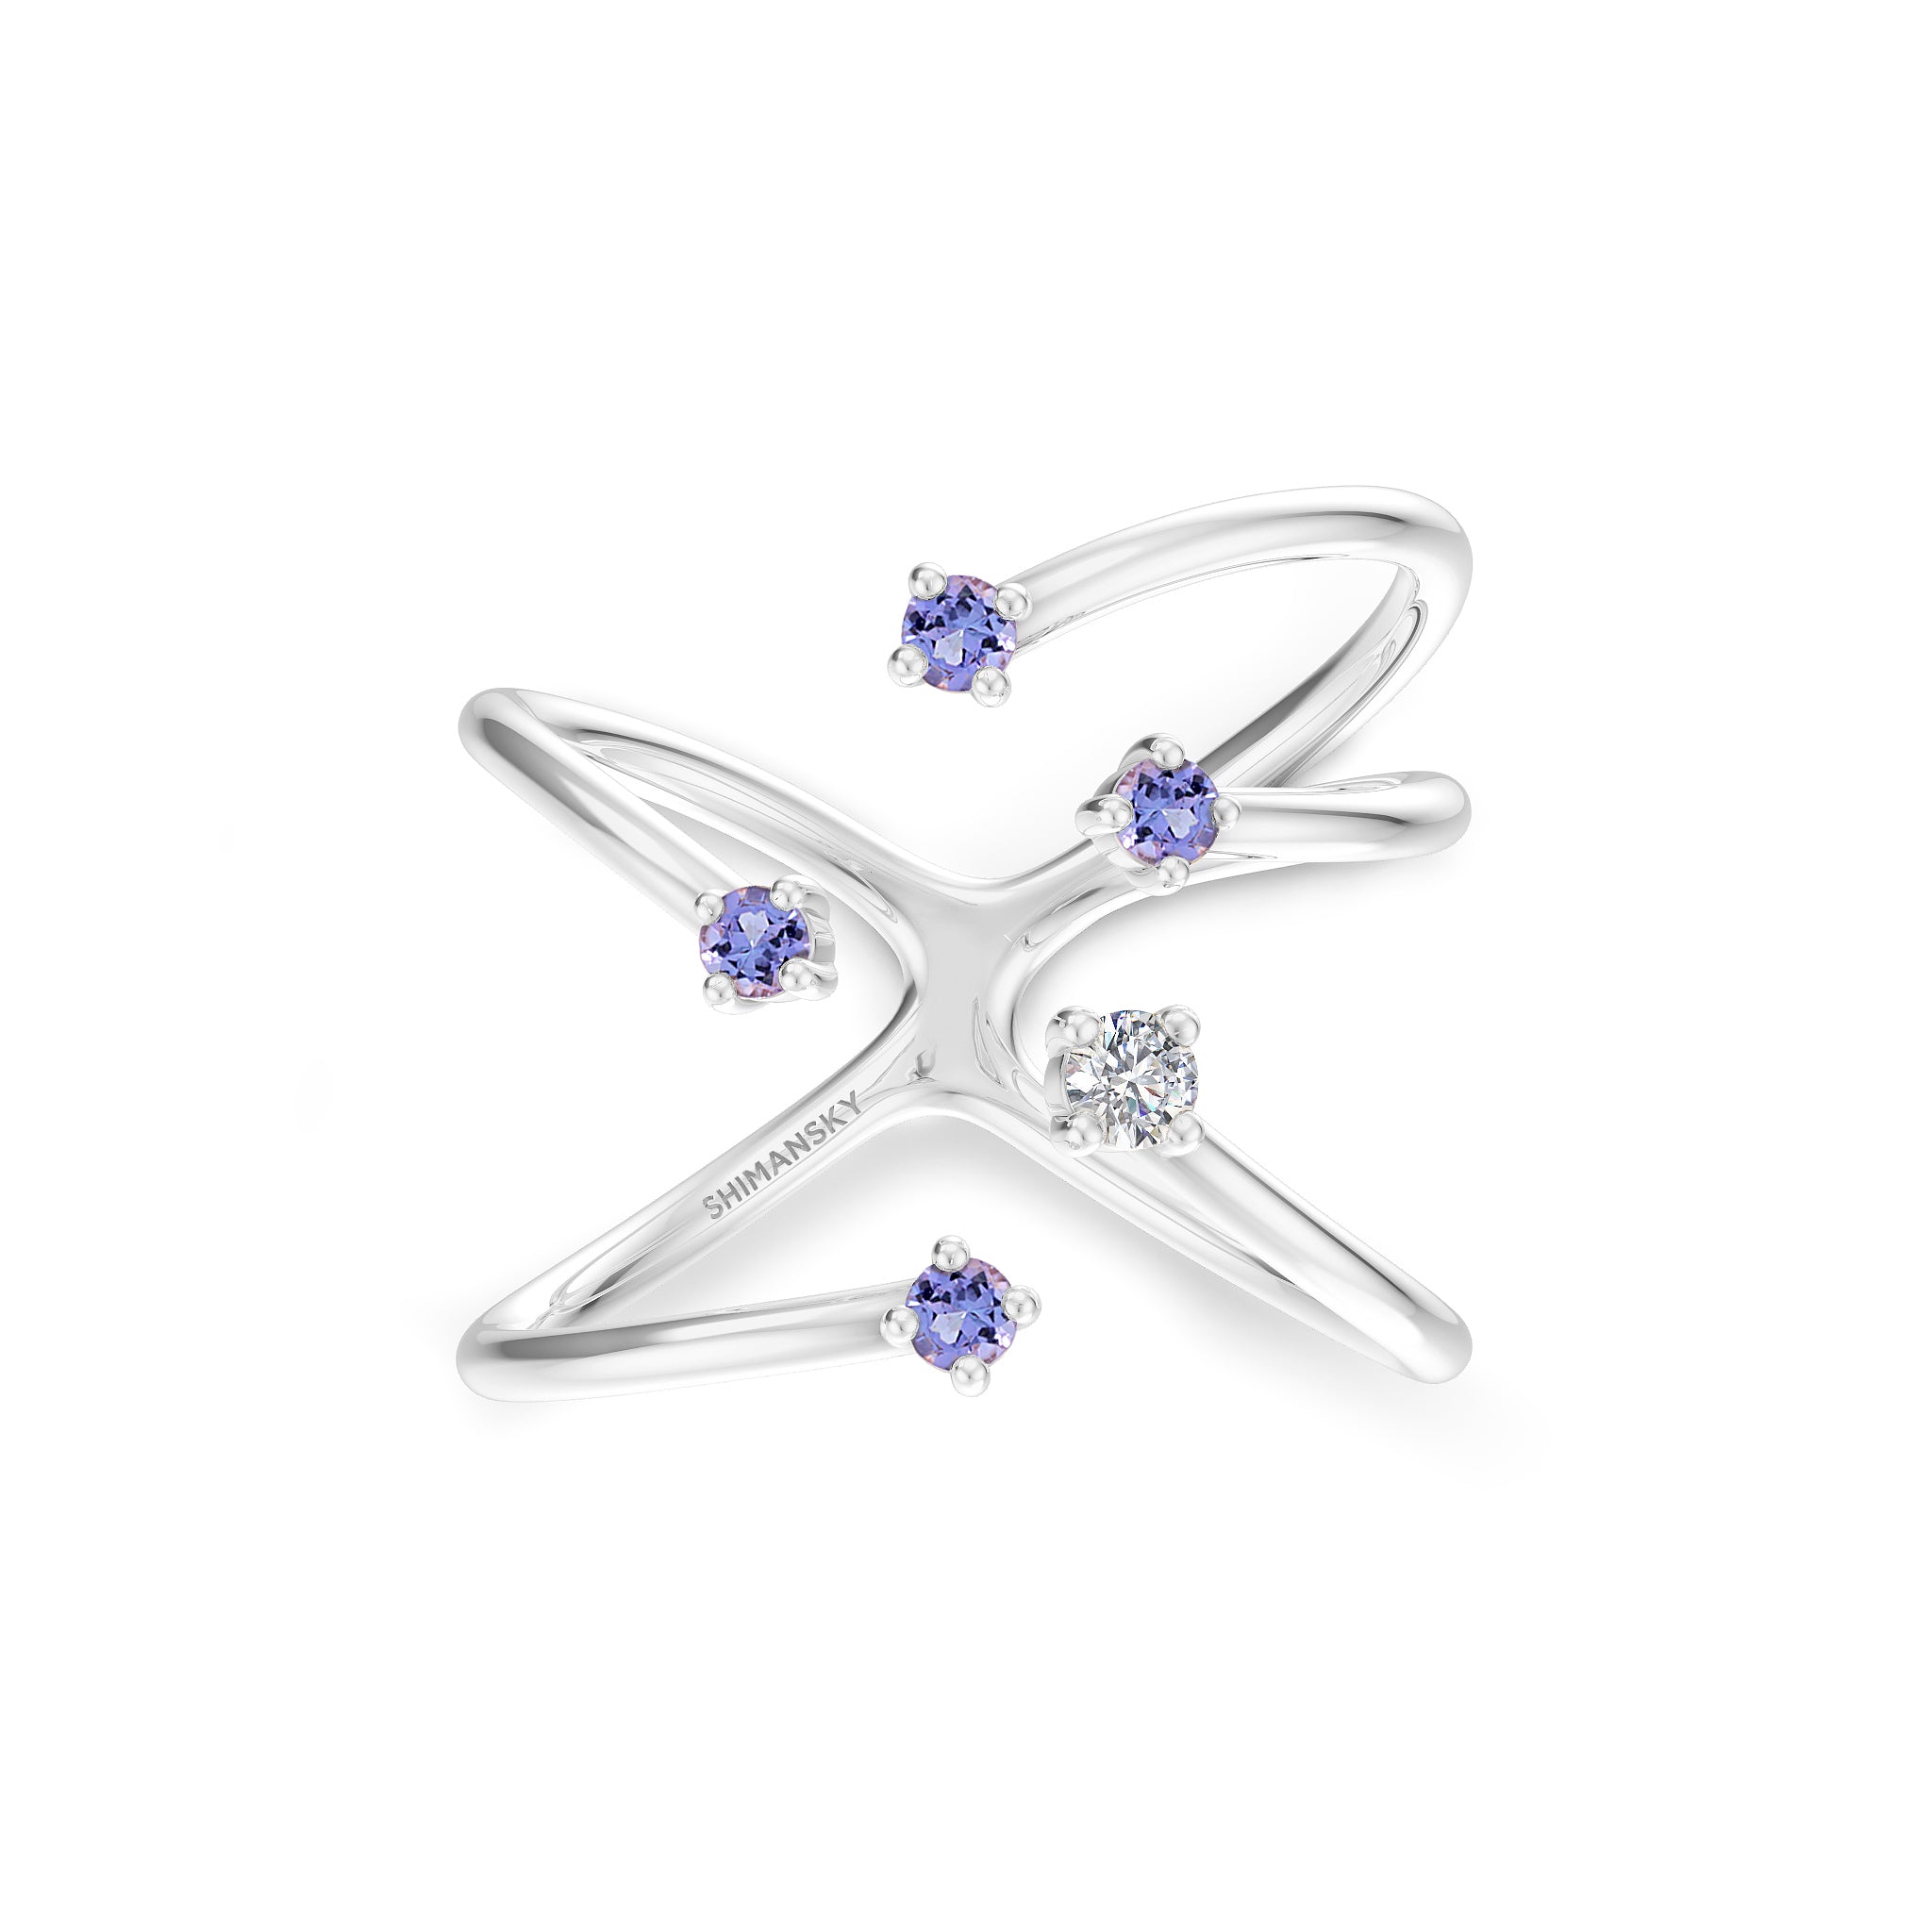 Shimansky - Southern Cross Diamond and Tanzanite Ring Crafted in 14K White Gold